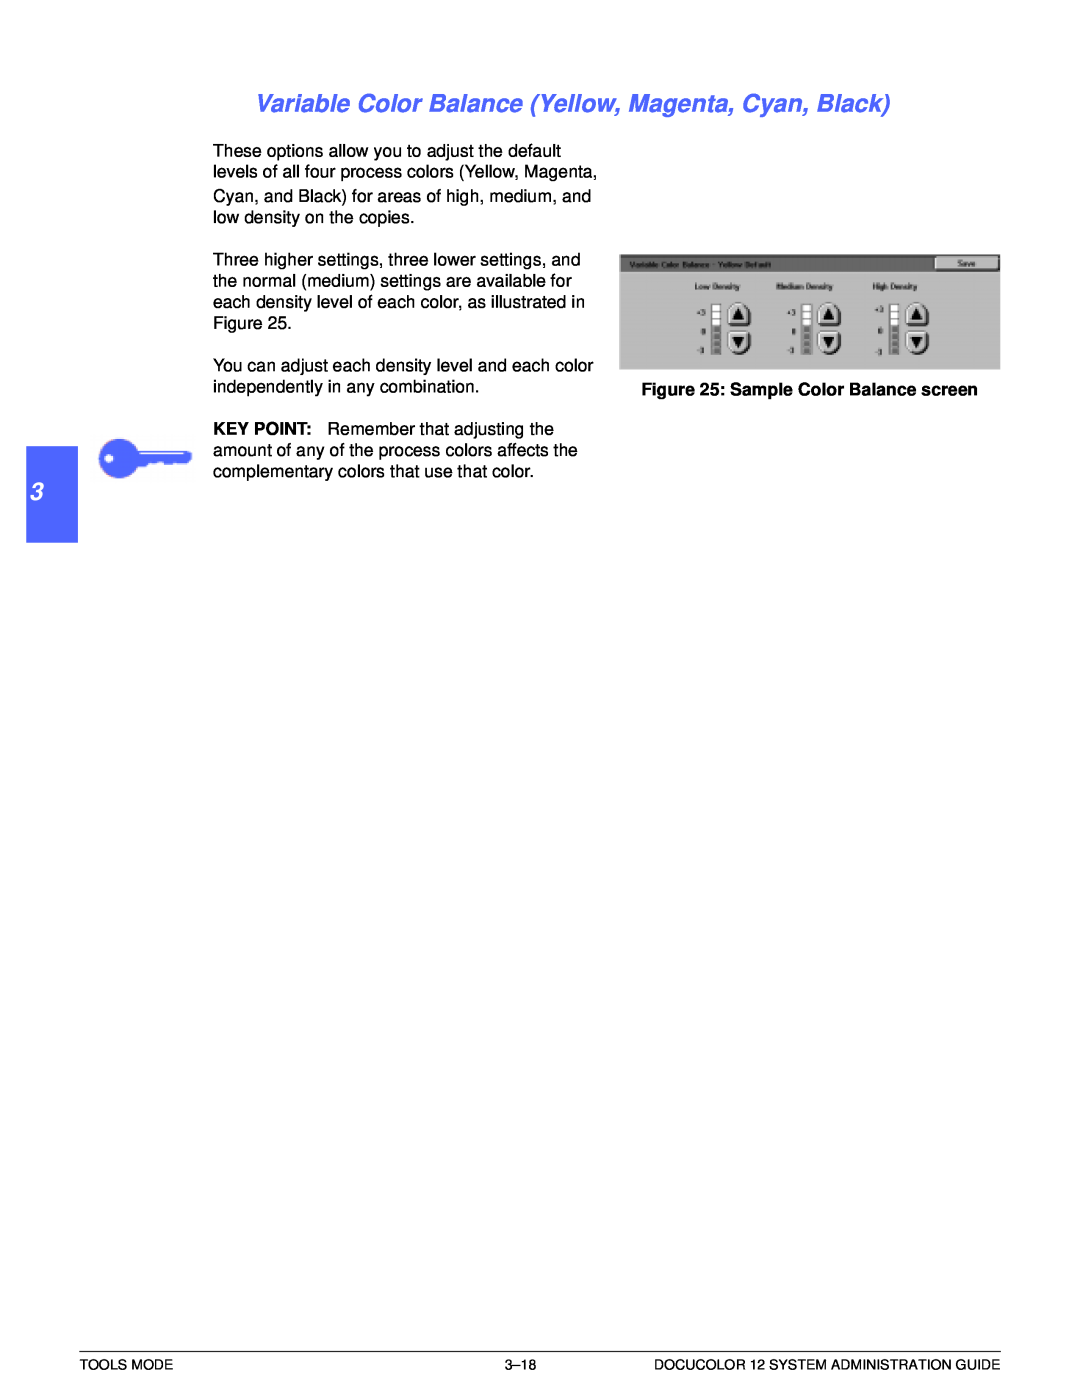 Xerox a2 manual 1 2 3 4 5 6 7, You can adjust each density level and each color 